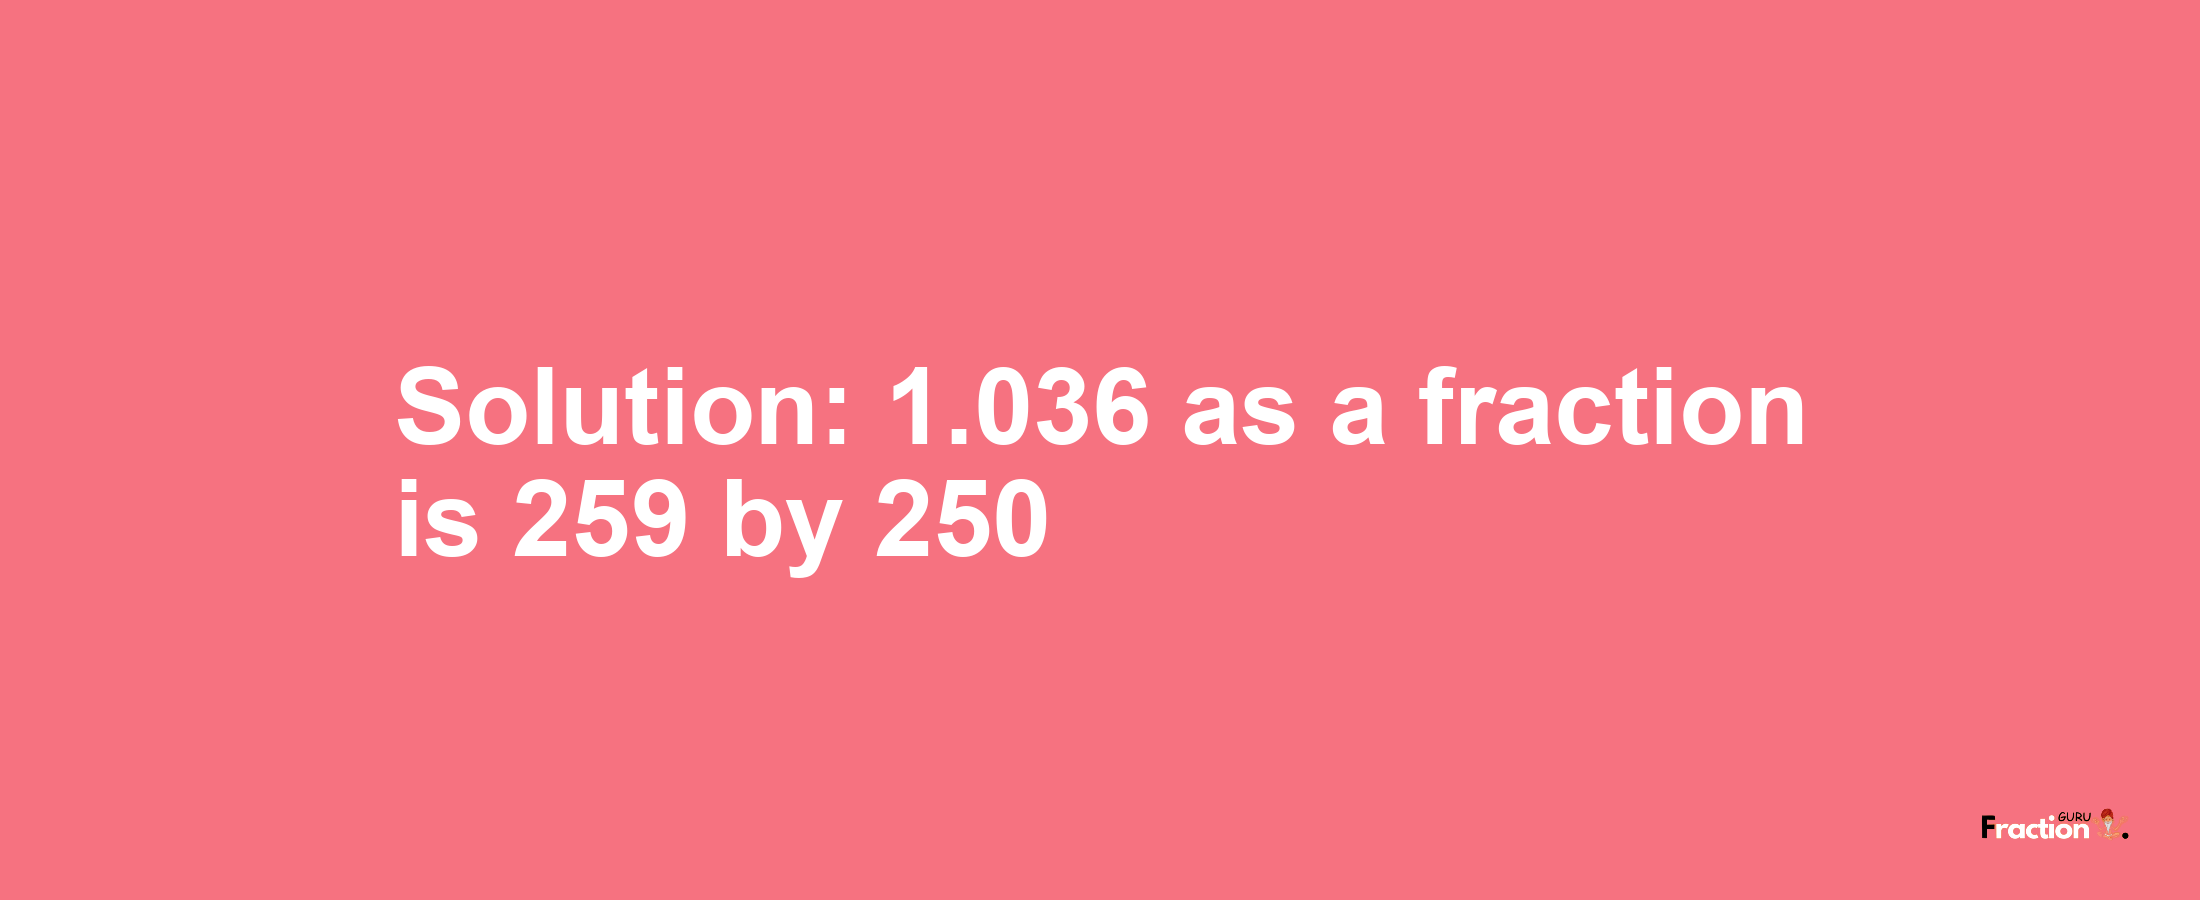 Solution:1.036 as a fraction is 259/250